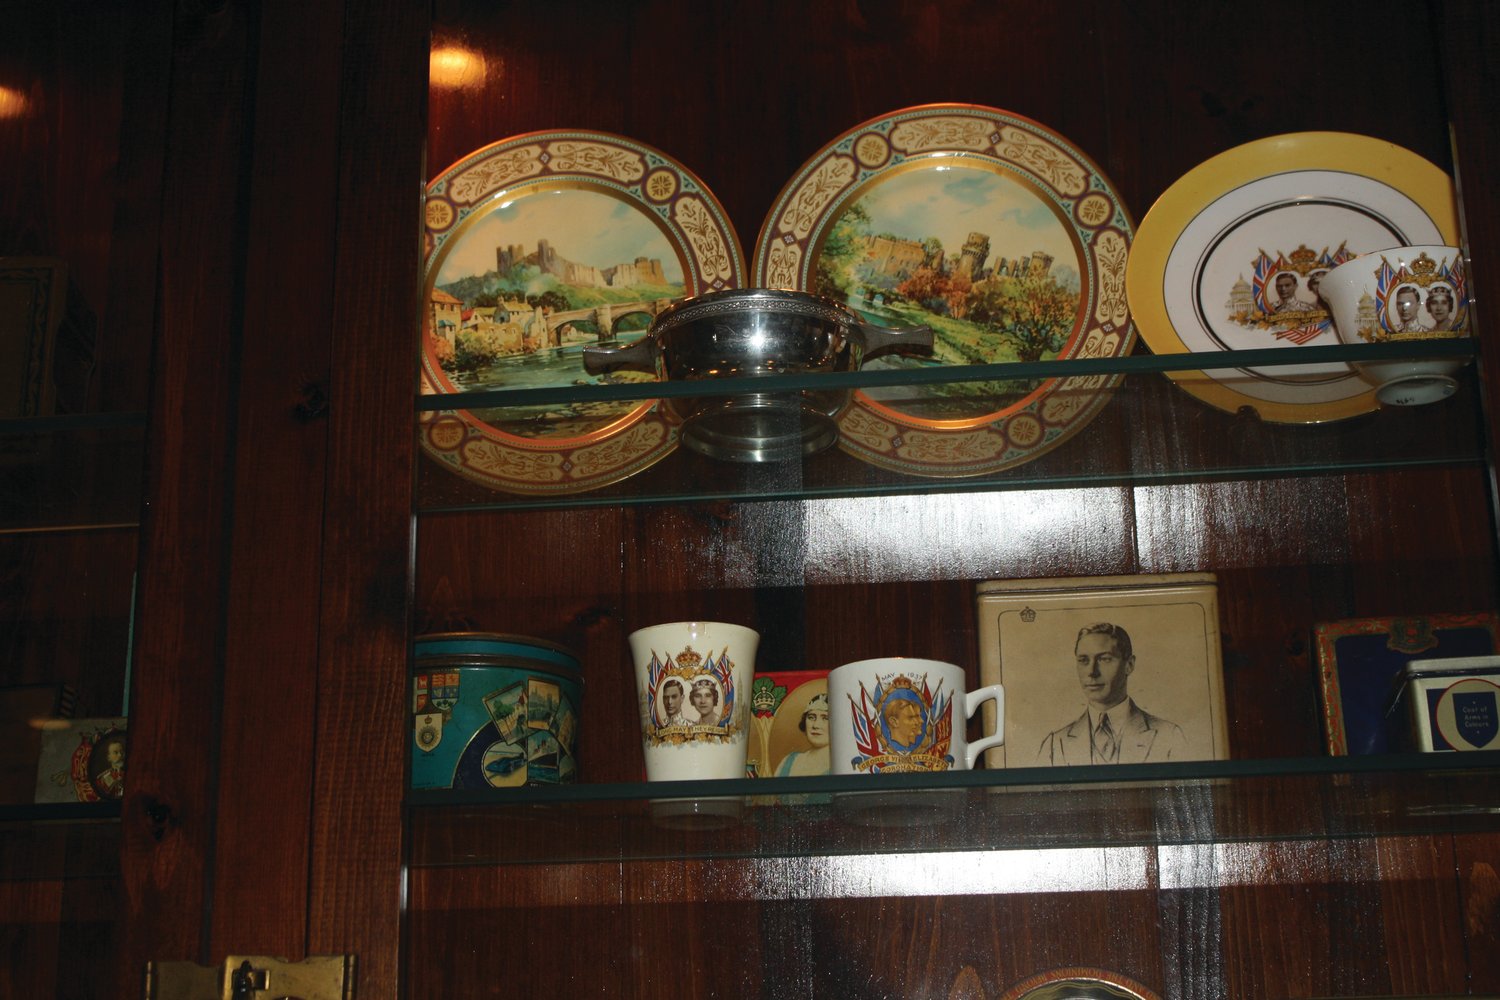 A small part of the extensive collection of memorabilia of the British royal family displayed at the Black Bass Hotel.